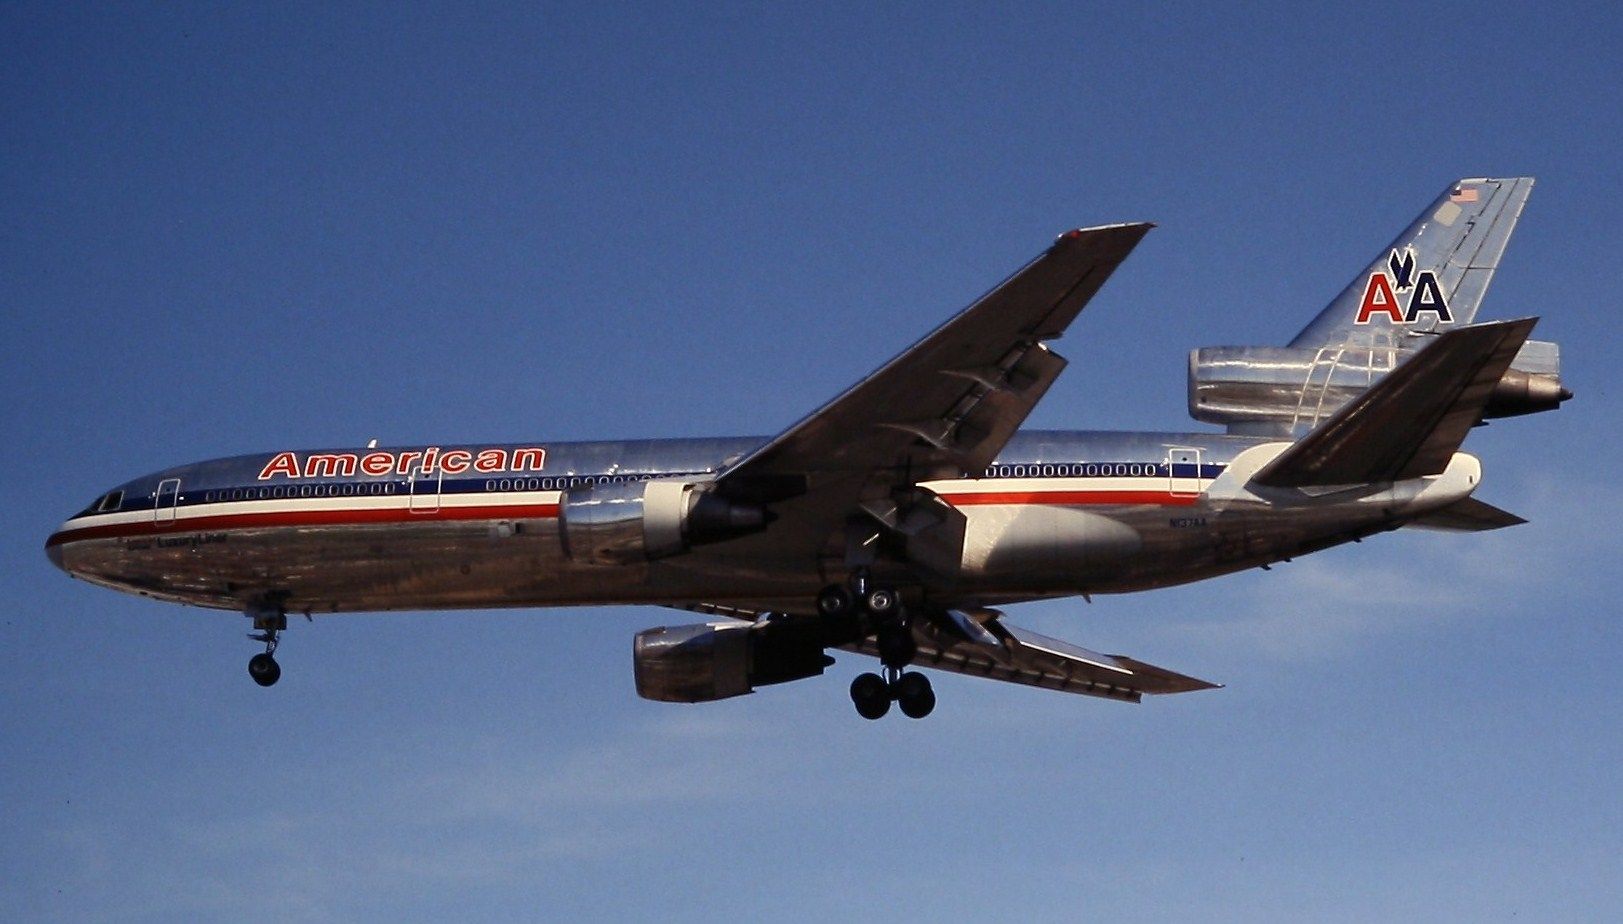 An American Airlines DC-10 flying in the sky.